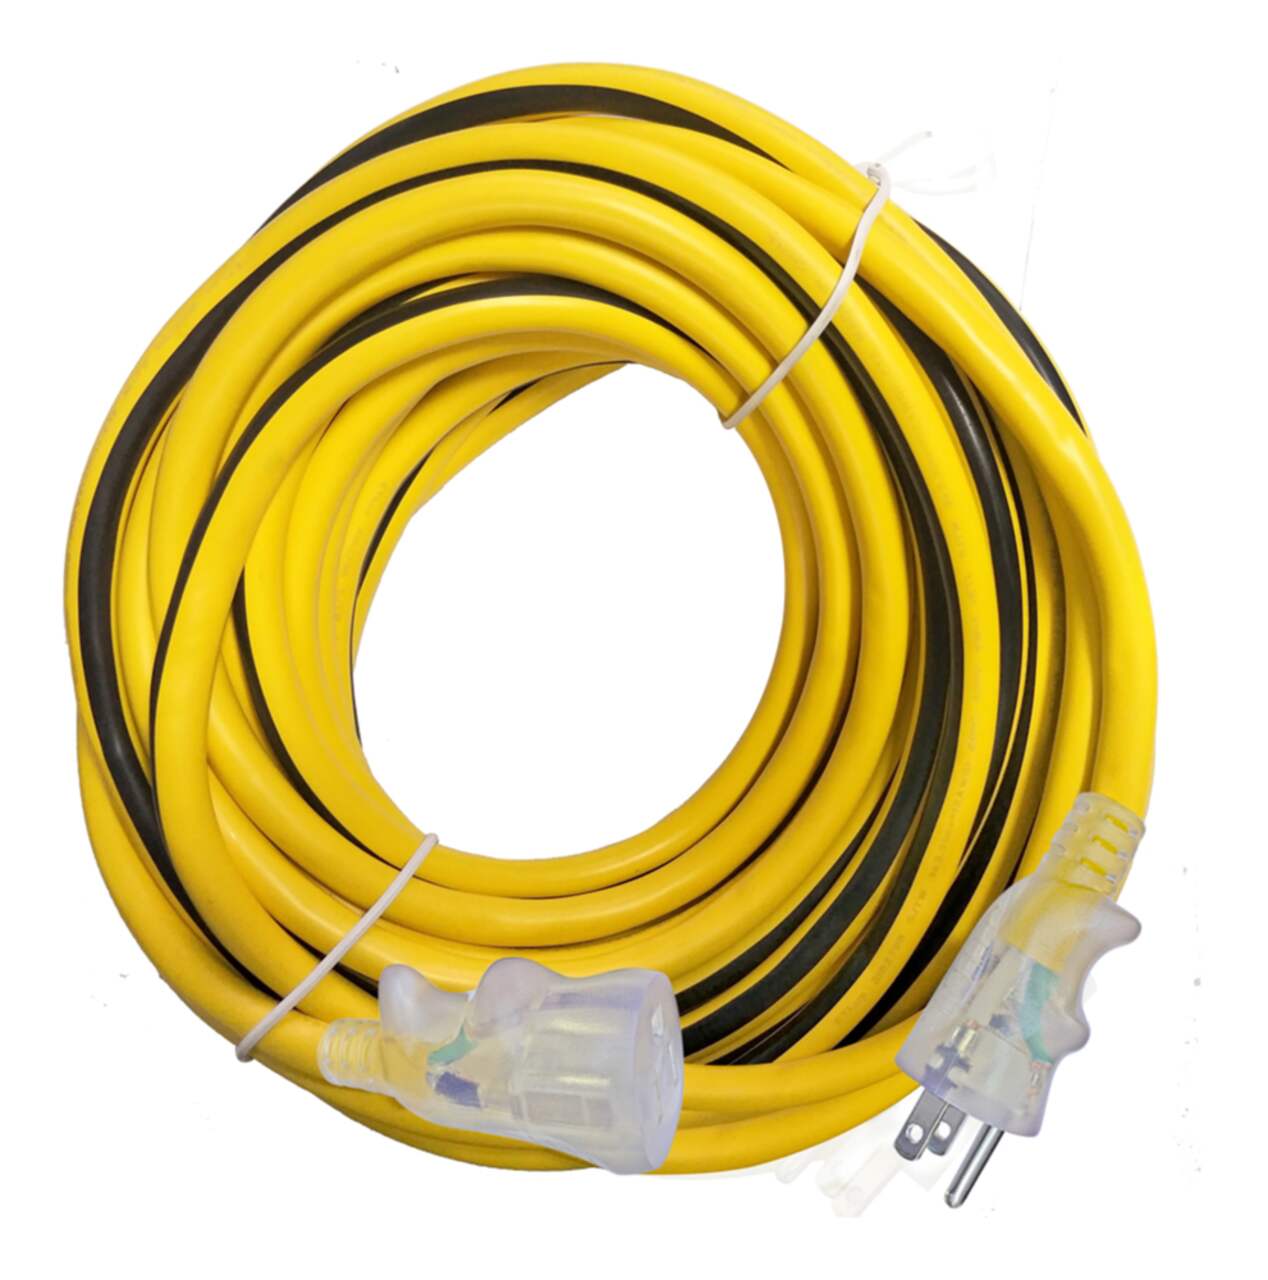 MAXIMUM 25-ft 12/3 Outdoor Extension Cord with Grounded Outlet, Lighted End  and Locking Connector, Yellow/Black